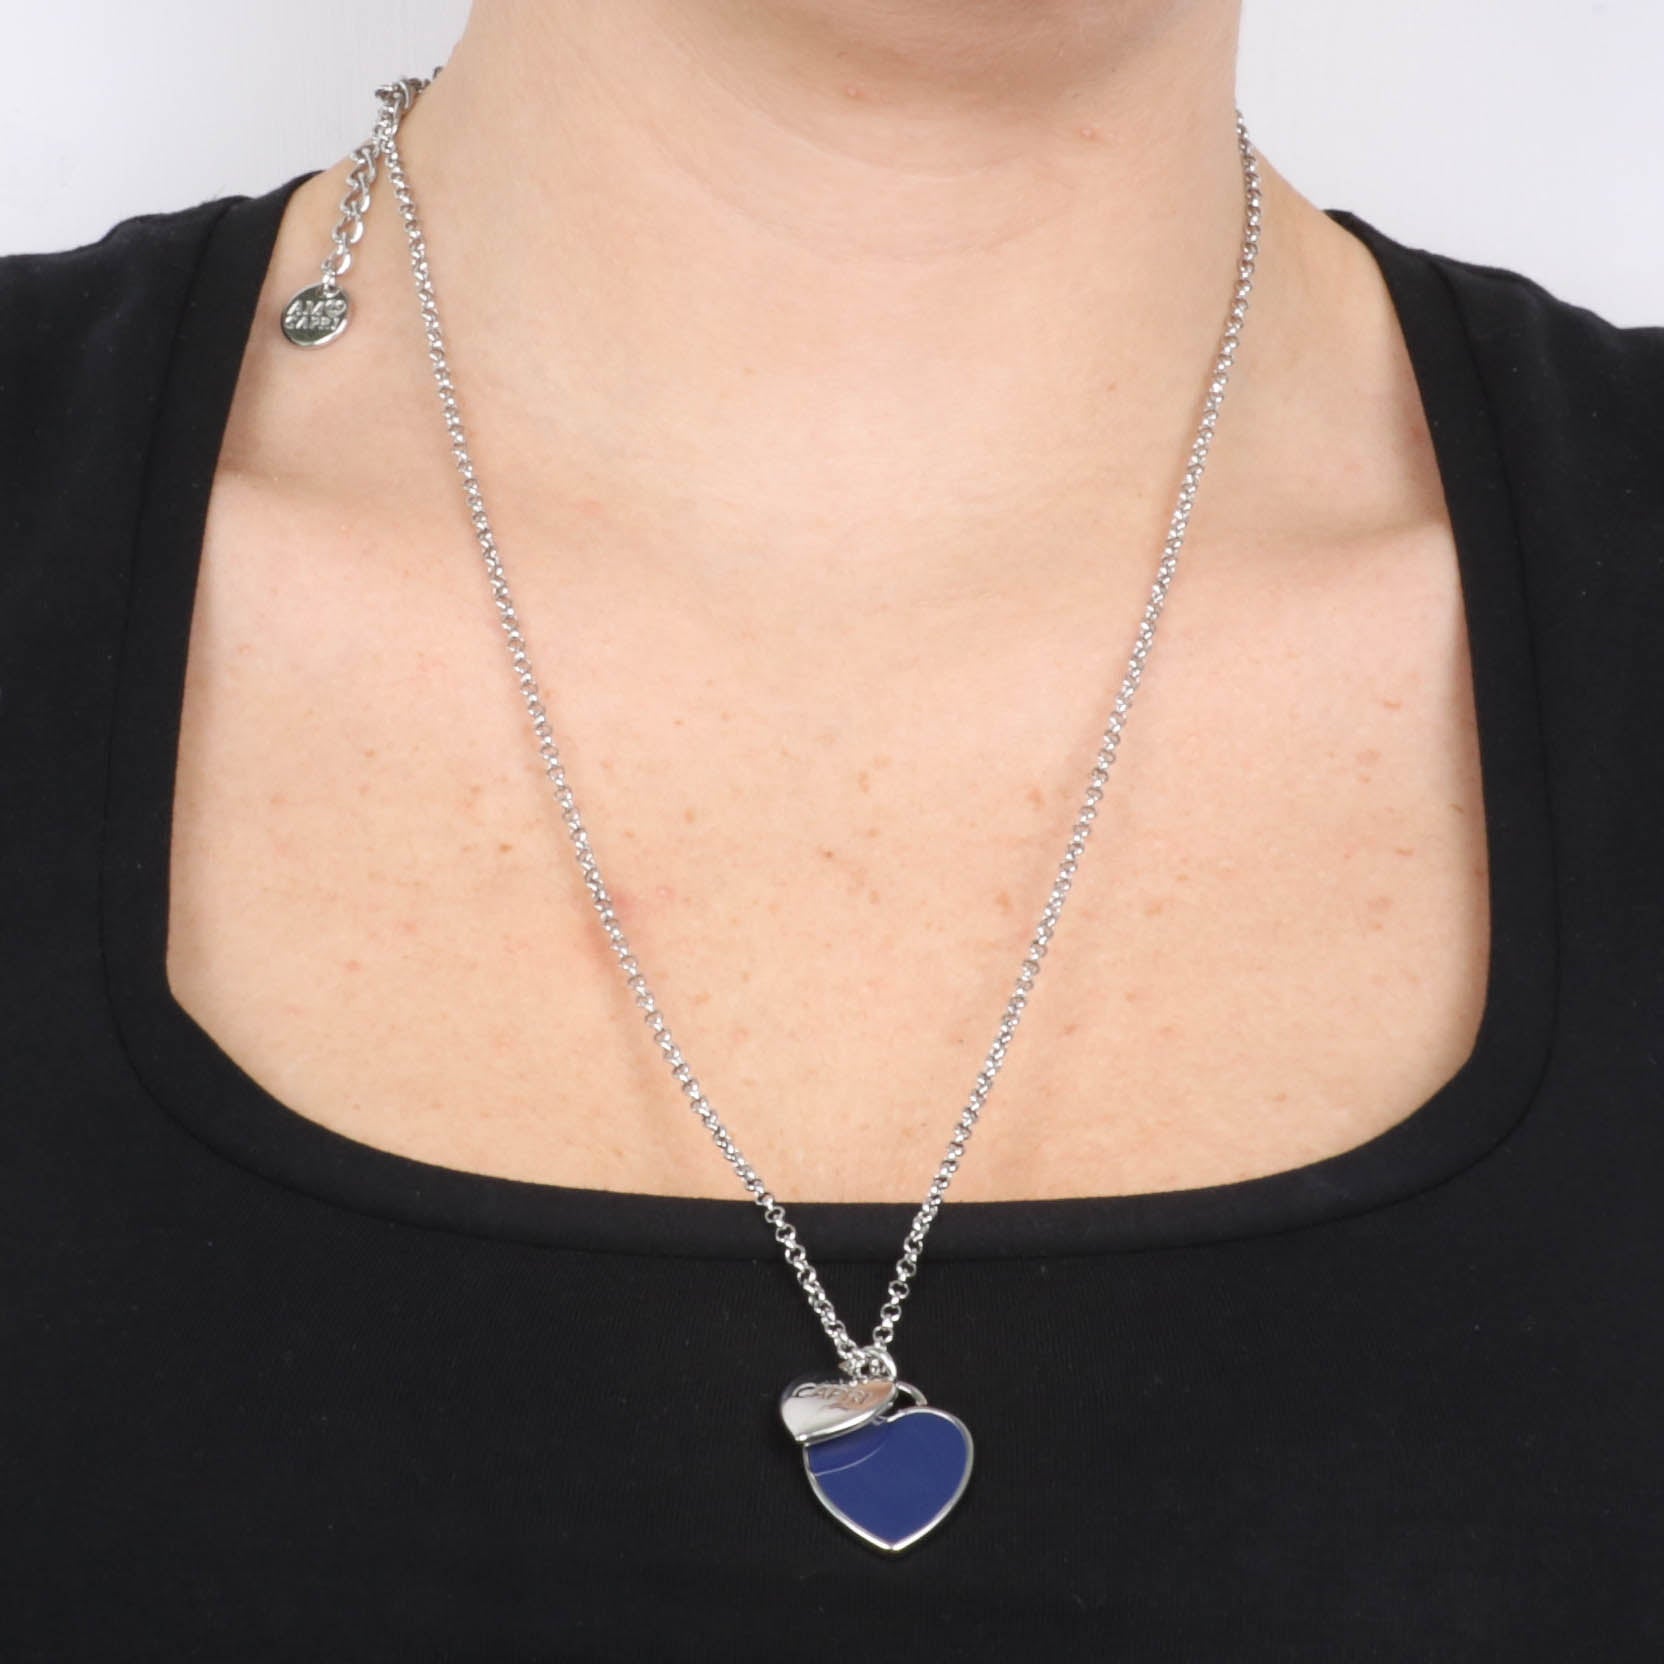 Metal necklace with heart pending blue enamel